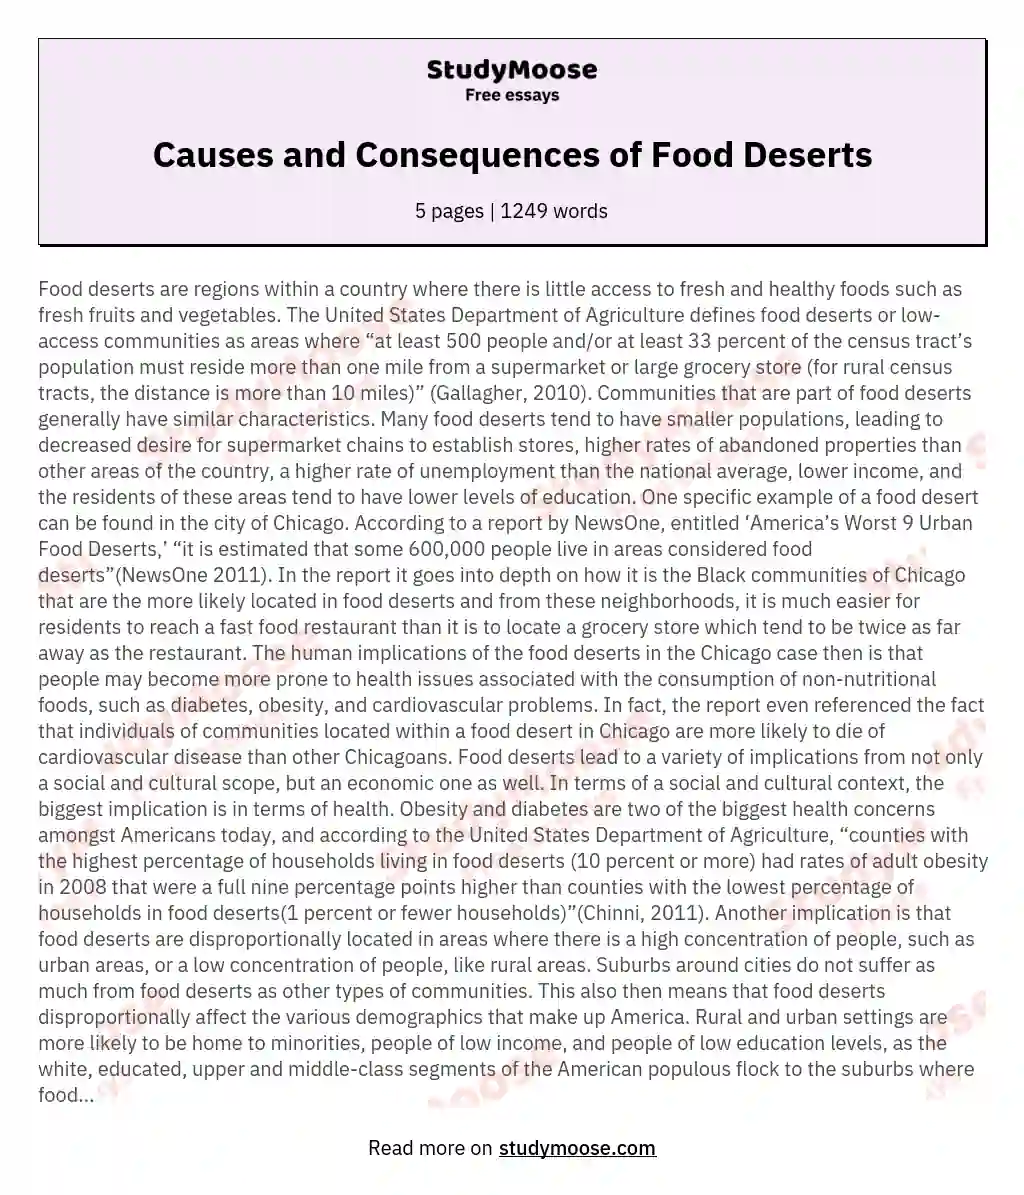 Сauses and Сonsequences of Food Deserts